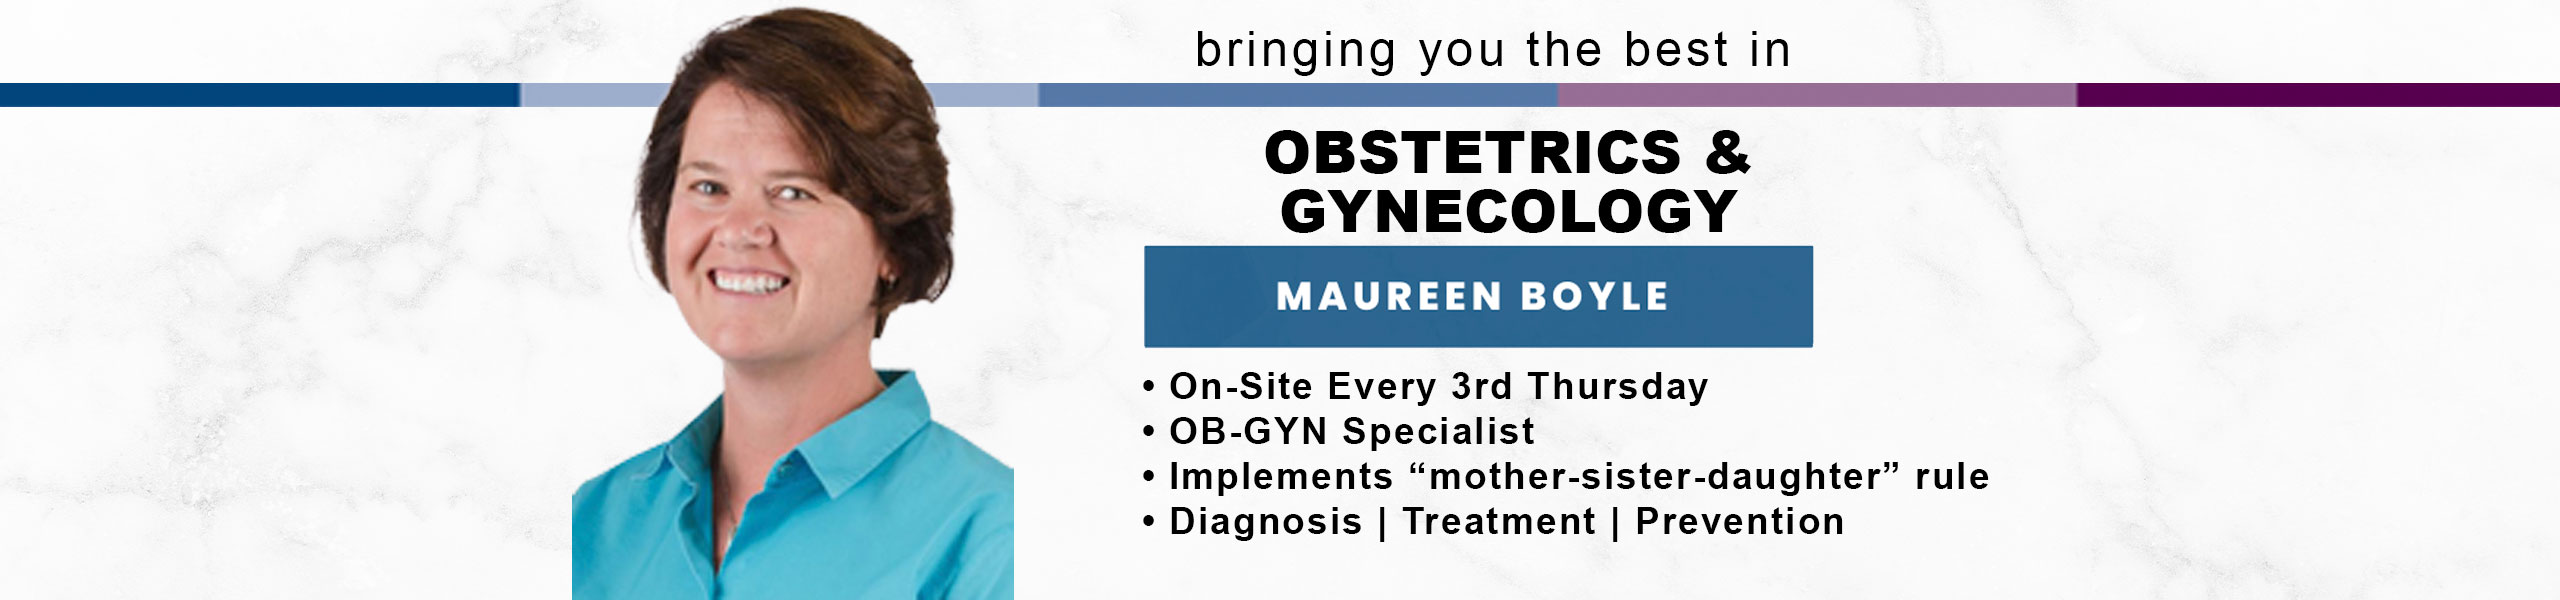 Bringing you the best in OBSTETRICS & GYNECOLOGY
MAUREEN BOYLE
*On-Site Every 3rd Thursday
*OB-GYN Specialist
*Implements "mother-sister-daughter" rule
* Diagnosis - Treatment - Prevention